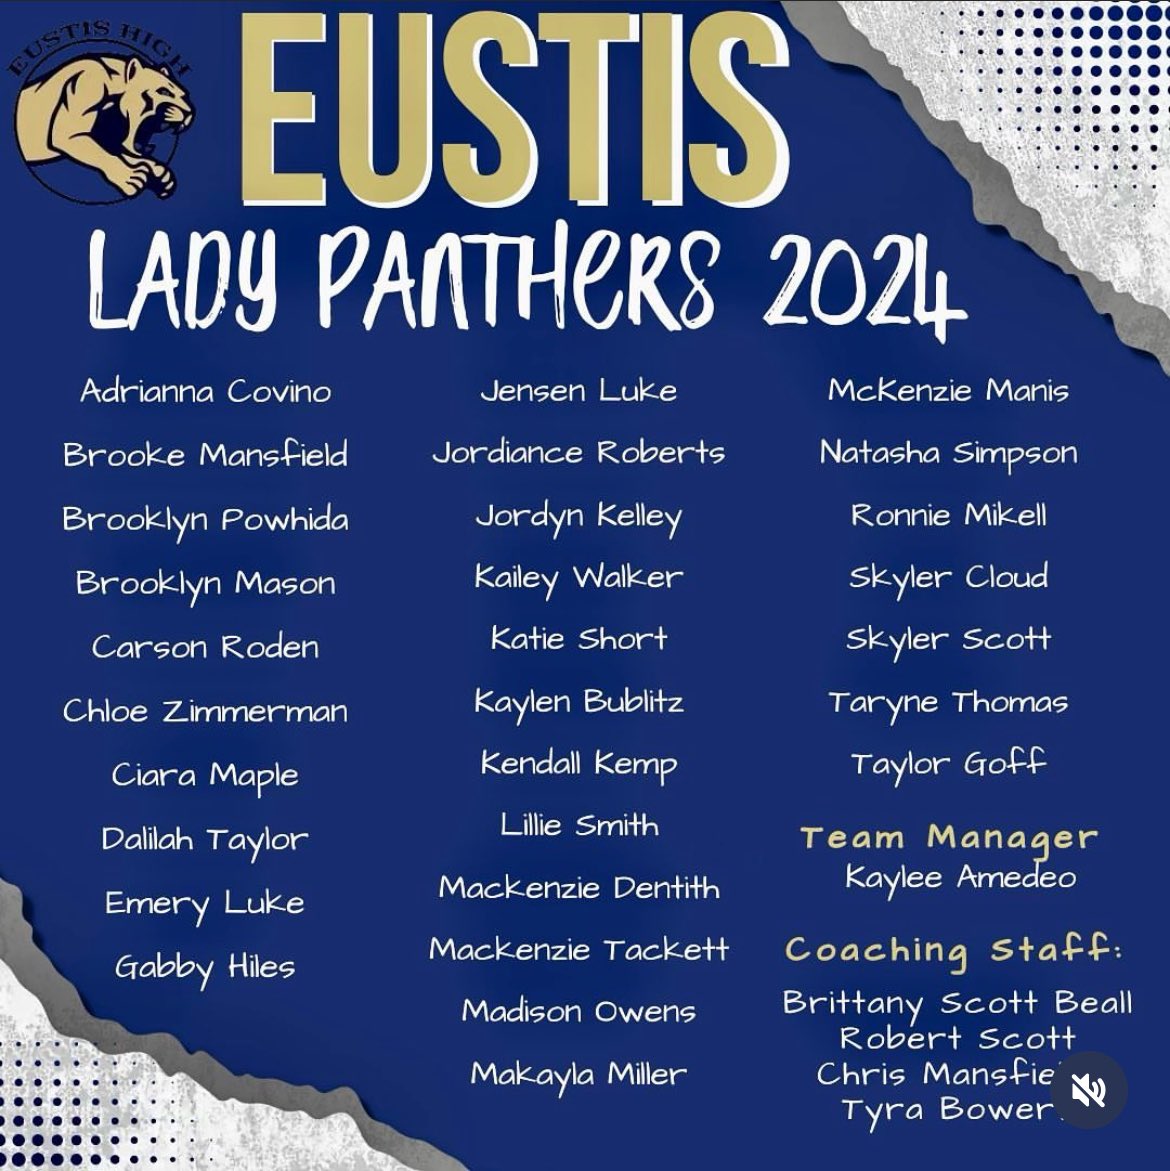 YOUR 2024 EUSTIS LADY PANTHERS! Looking forward to an amazing season!! Were coming for it all! Go panthers!!! 💙💛 @bbeall0628